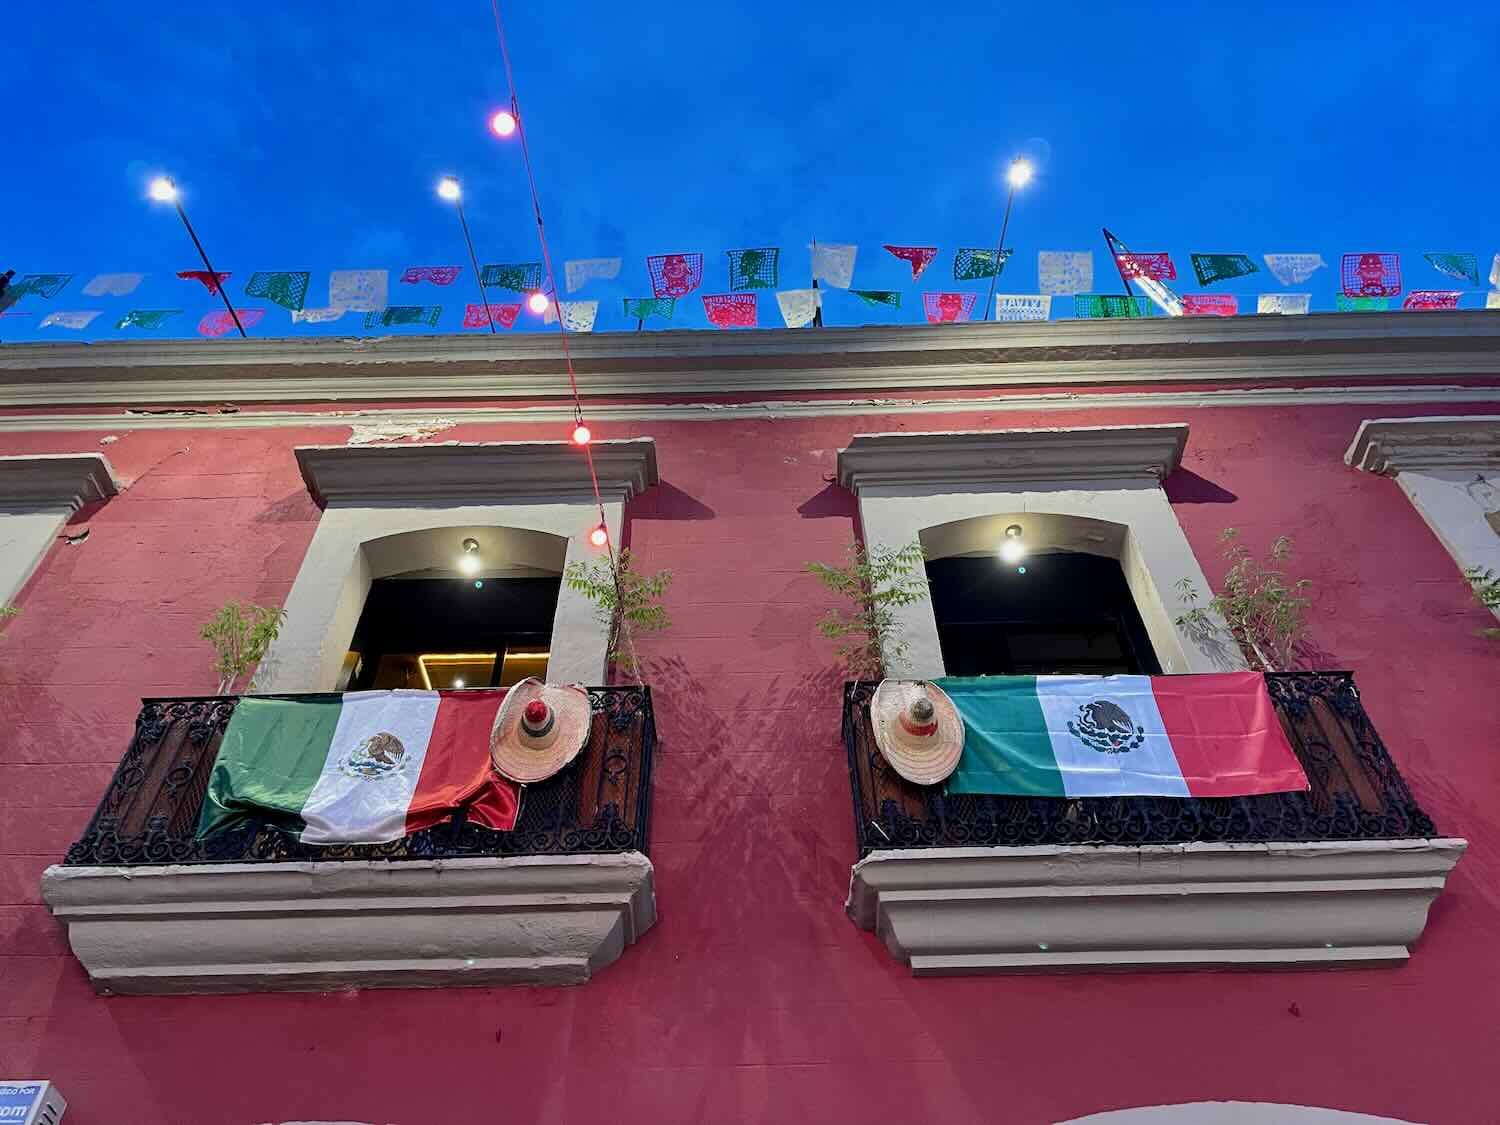 Few people wear the classic sombreros anymore. But their strong association with Mexico's national heroes means they show up as decorations for Independence Day.